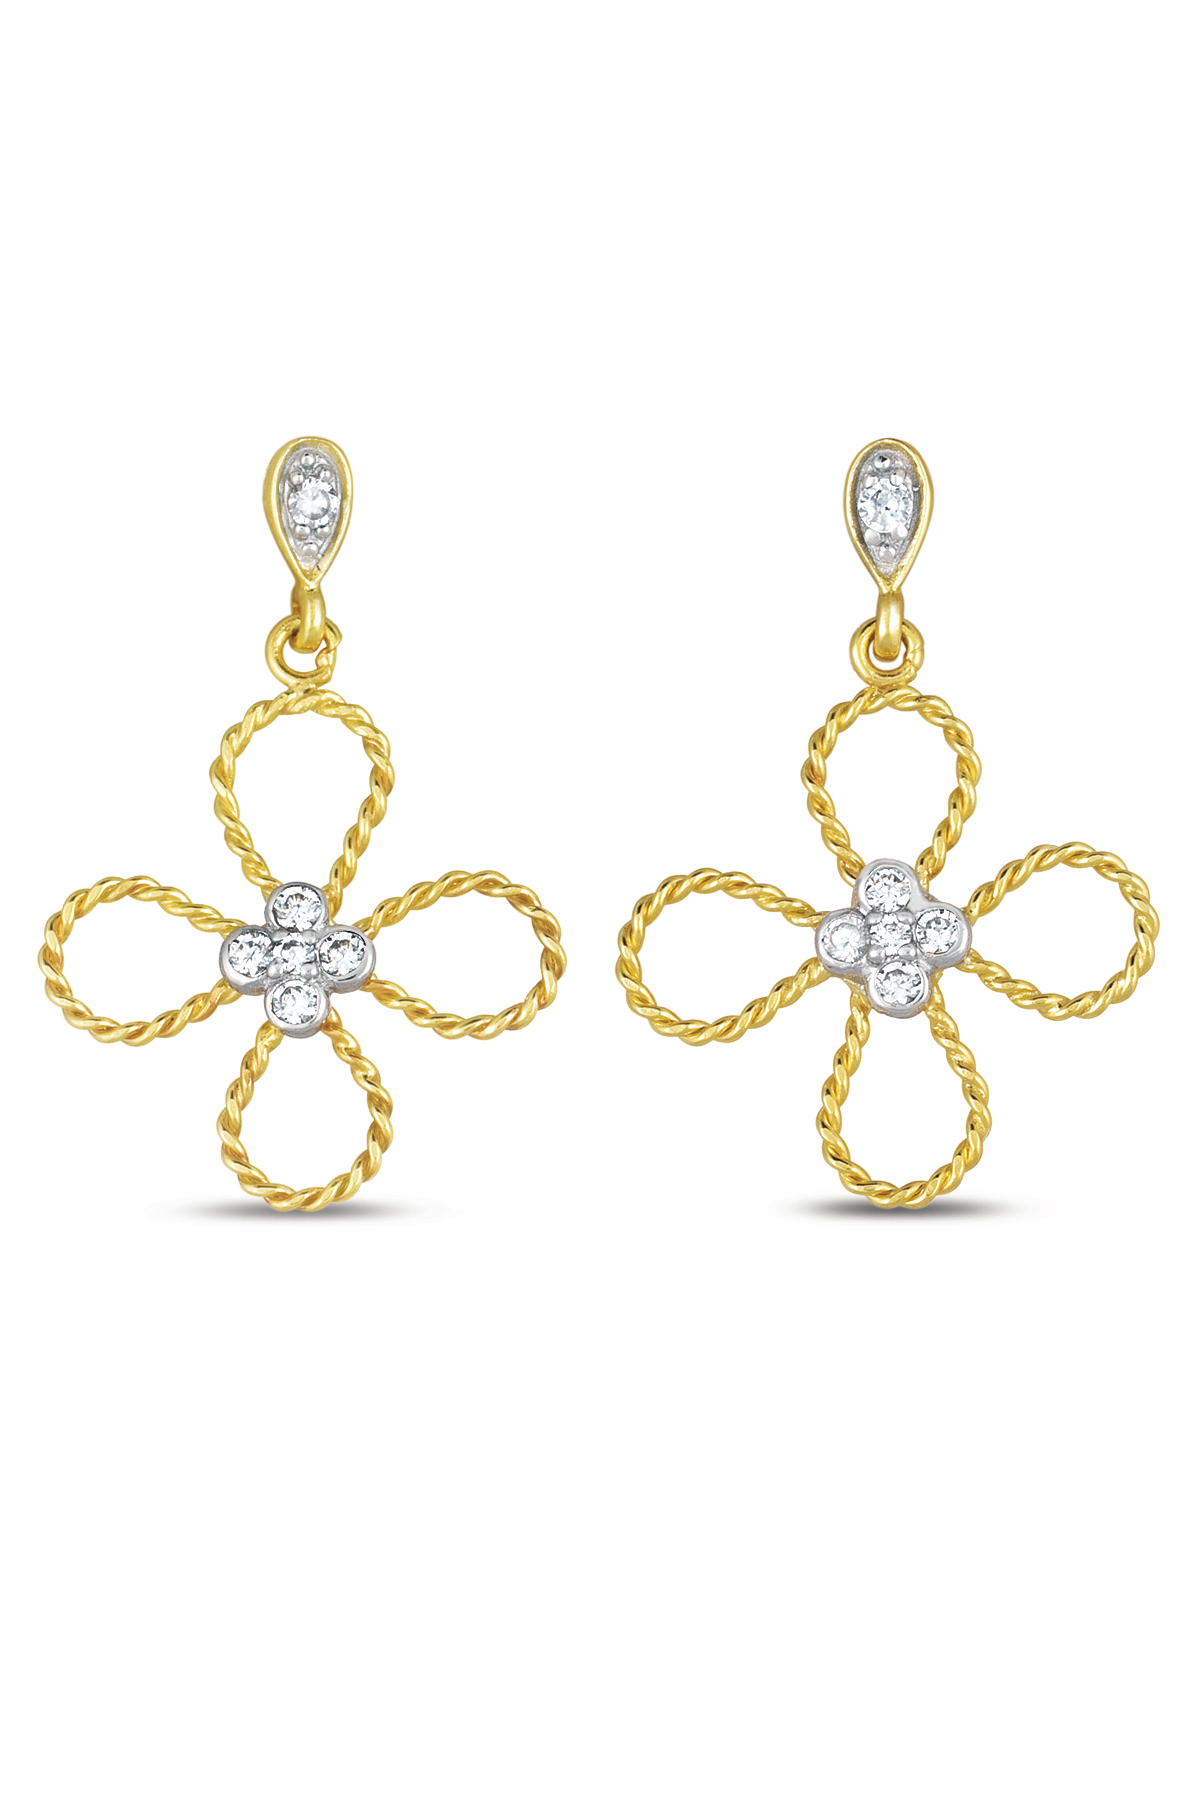 Cubic Zirconia (.925) Sterling Silver Gold Plated Flower Earrings